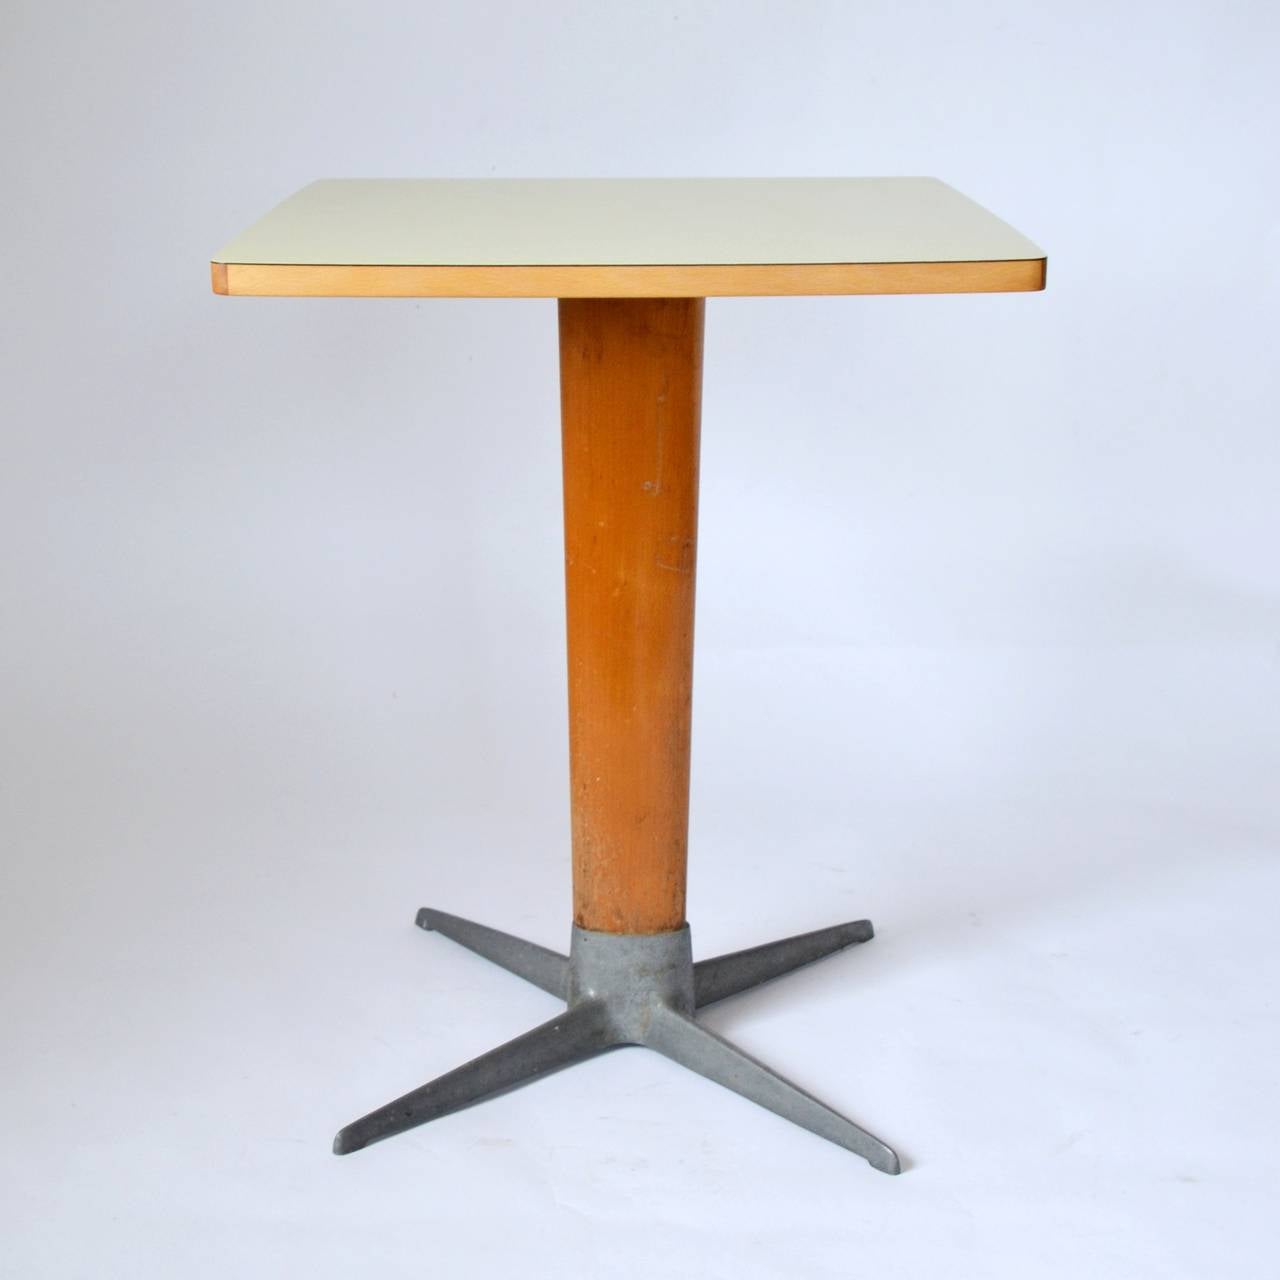 A Viennese coffee house table, designed by the Austrian architect Prof. Oswald Haerdtl and produced by Thonet, Austria, 1950s. Typical Haerdtl X-base made of metal with a stand made of beech. Beech top laminated with original formica. 

Vintage